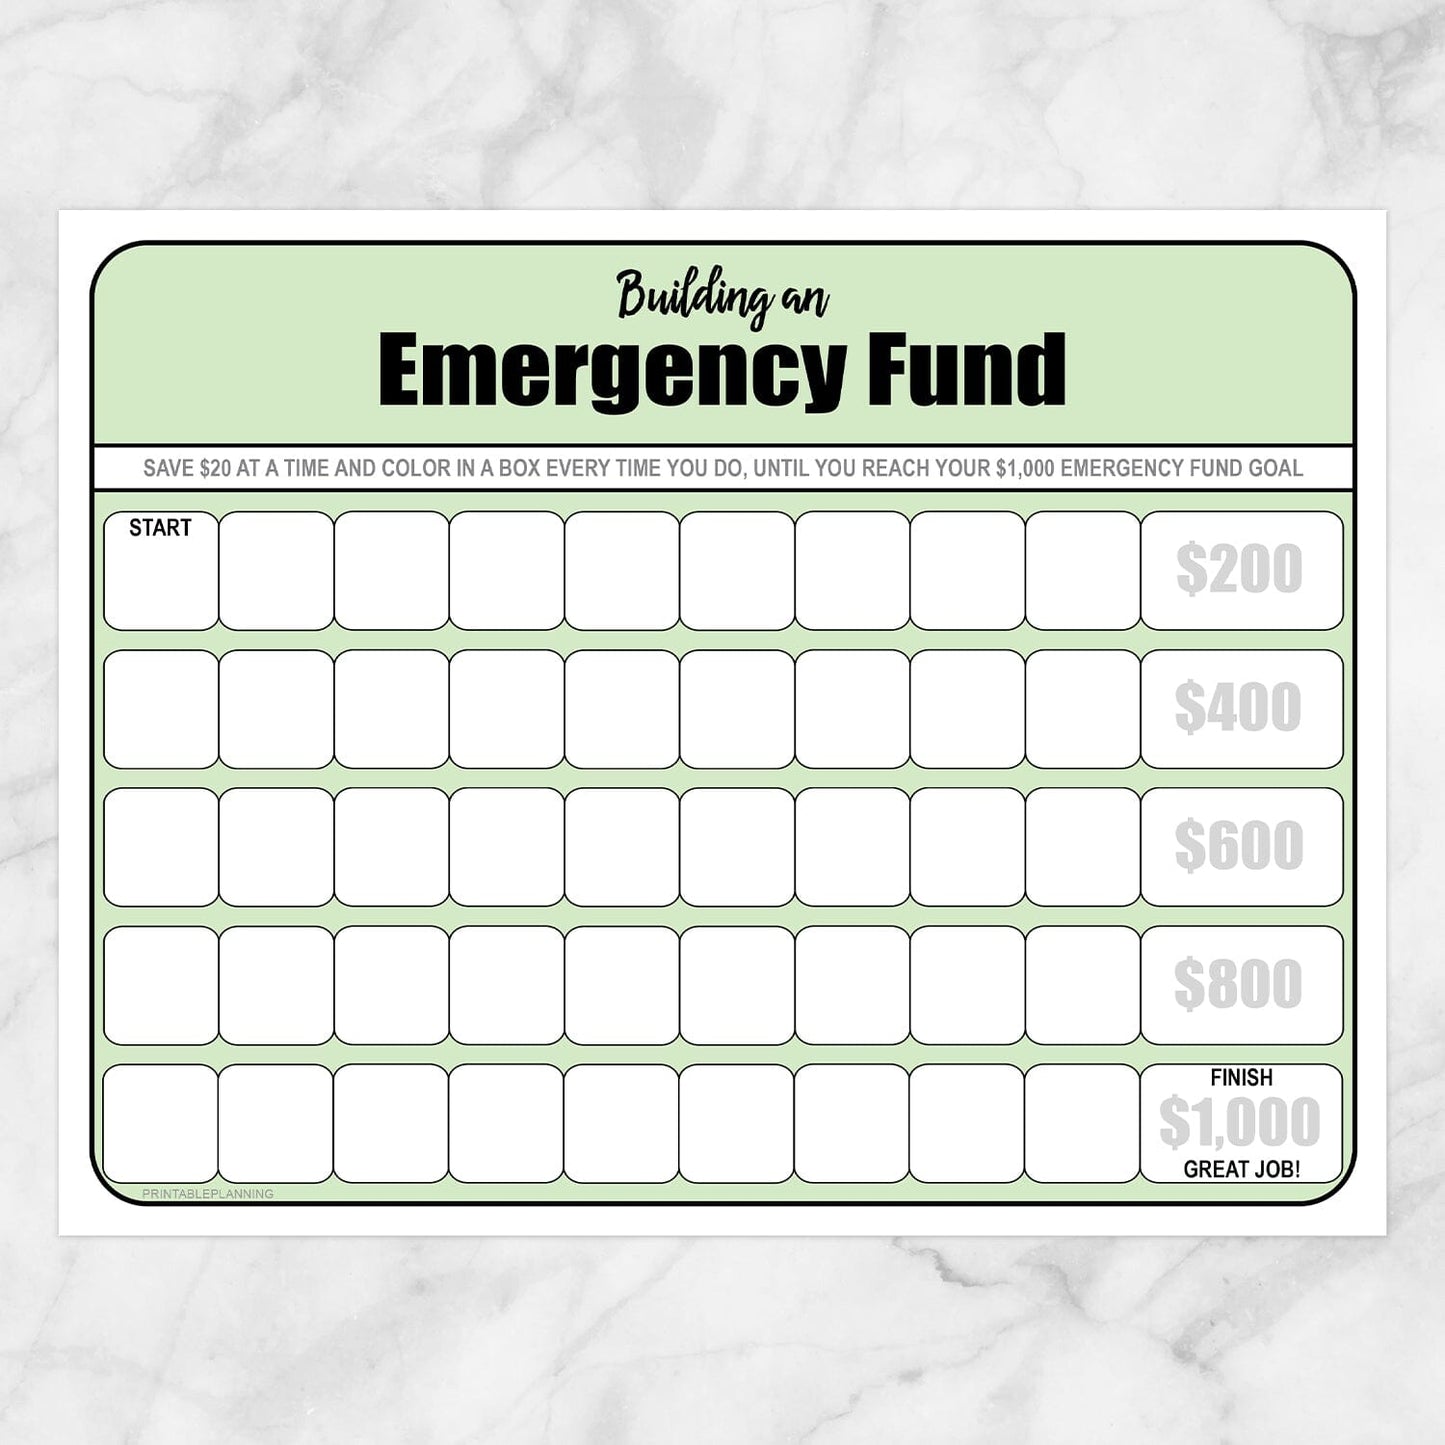 Printable Building an Emergency Fund Worksheet in Green (by $20 increments) at Printable Planning.